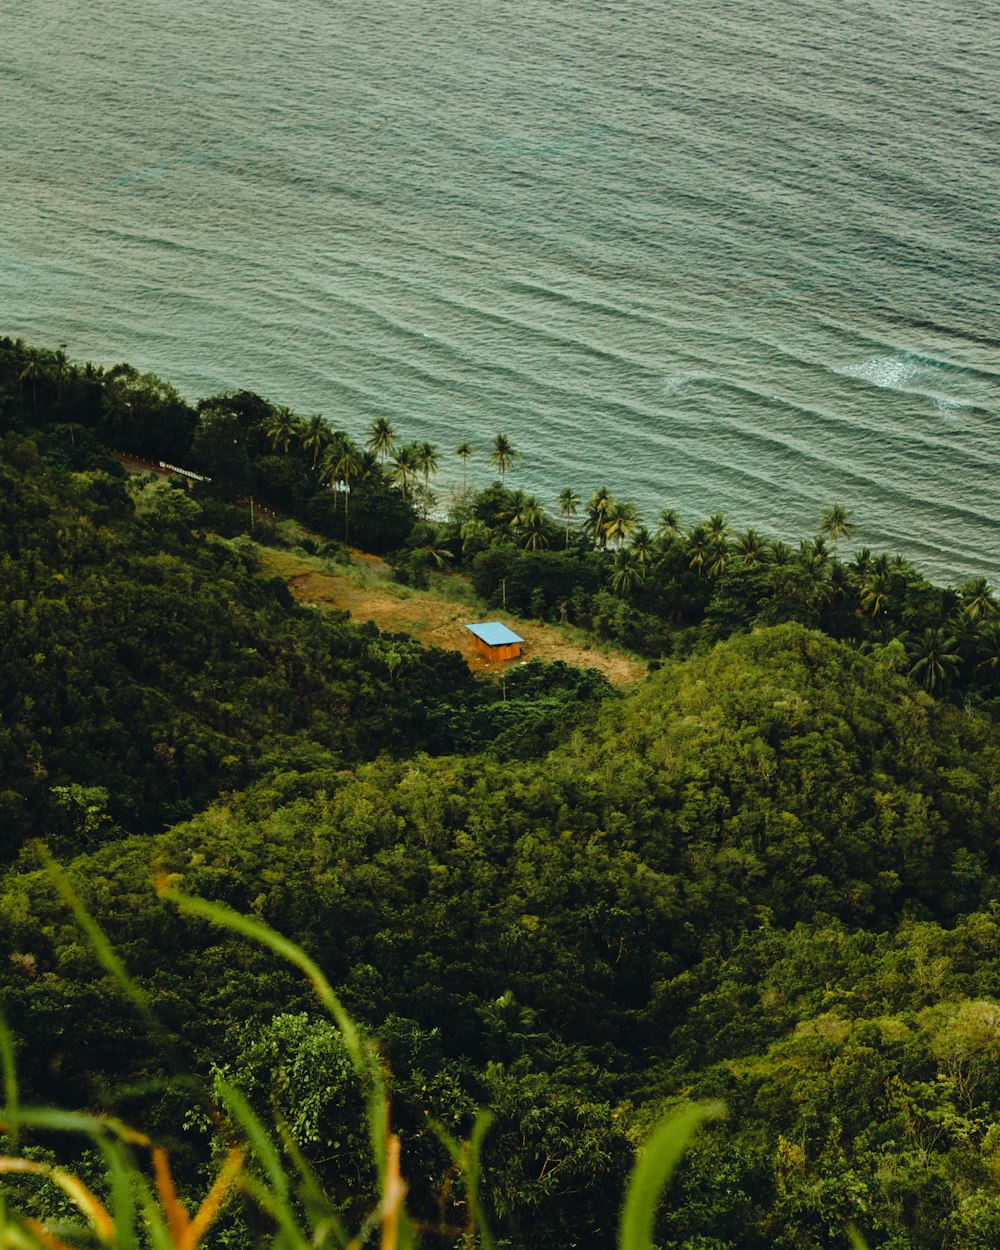 a house on a hill overlooking the ocean